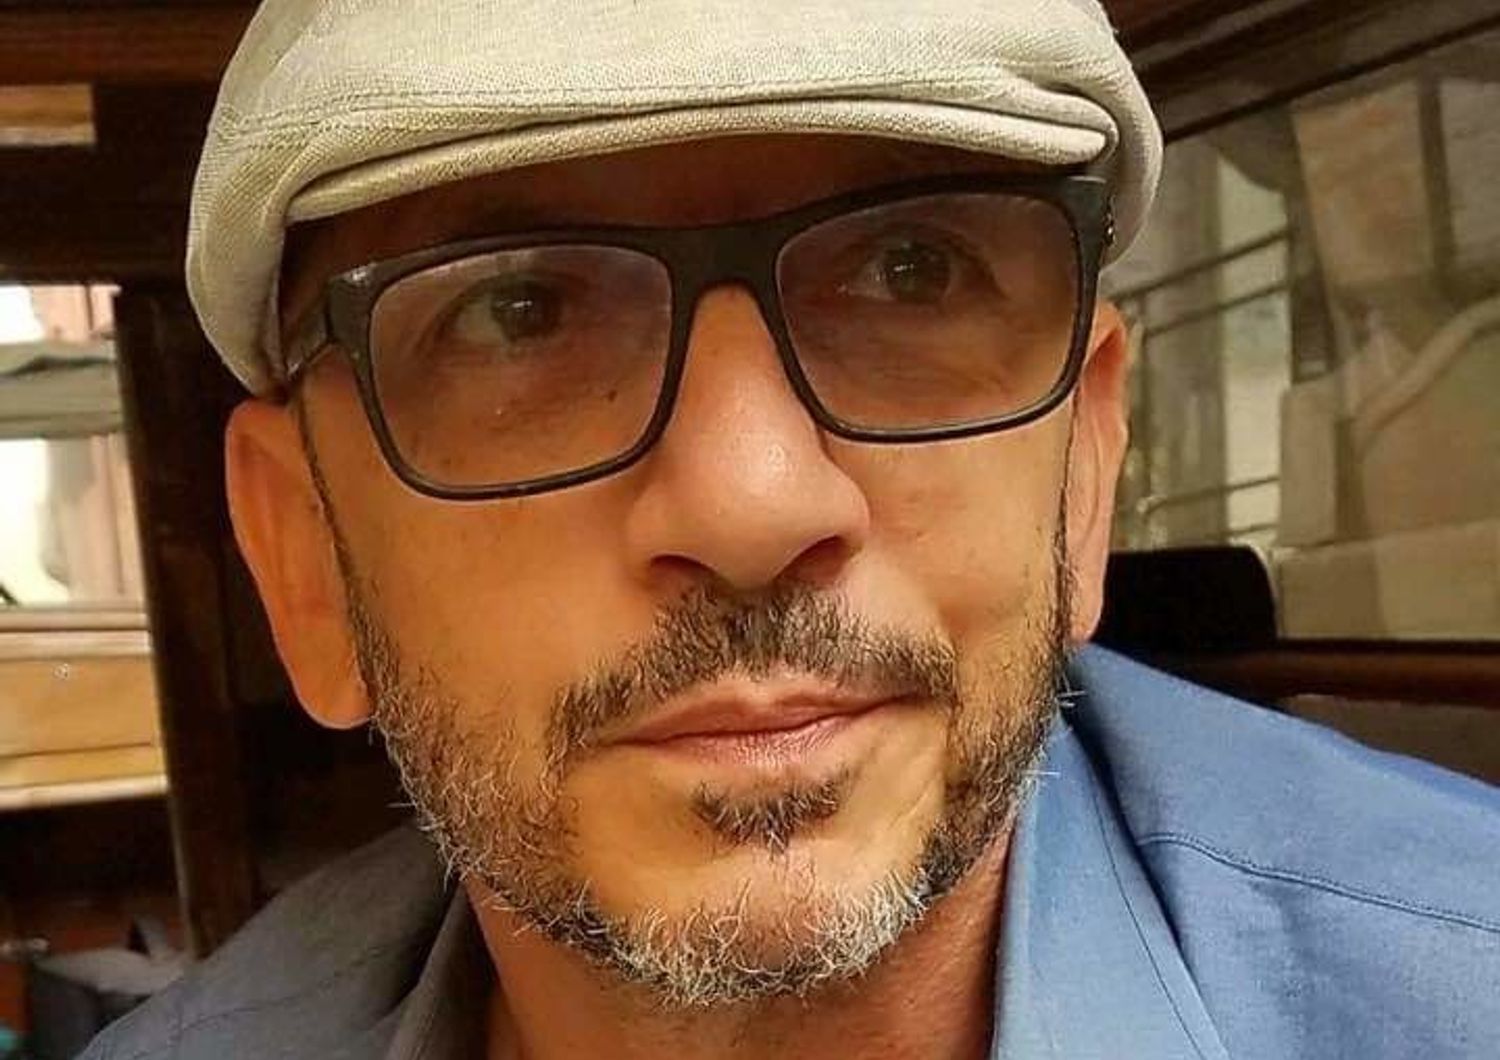 regista messinese ucciso hollywood